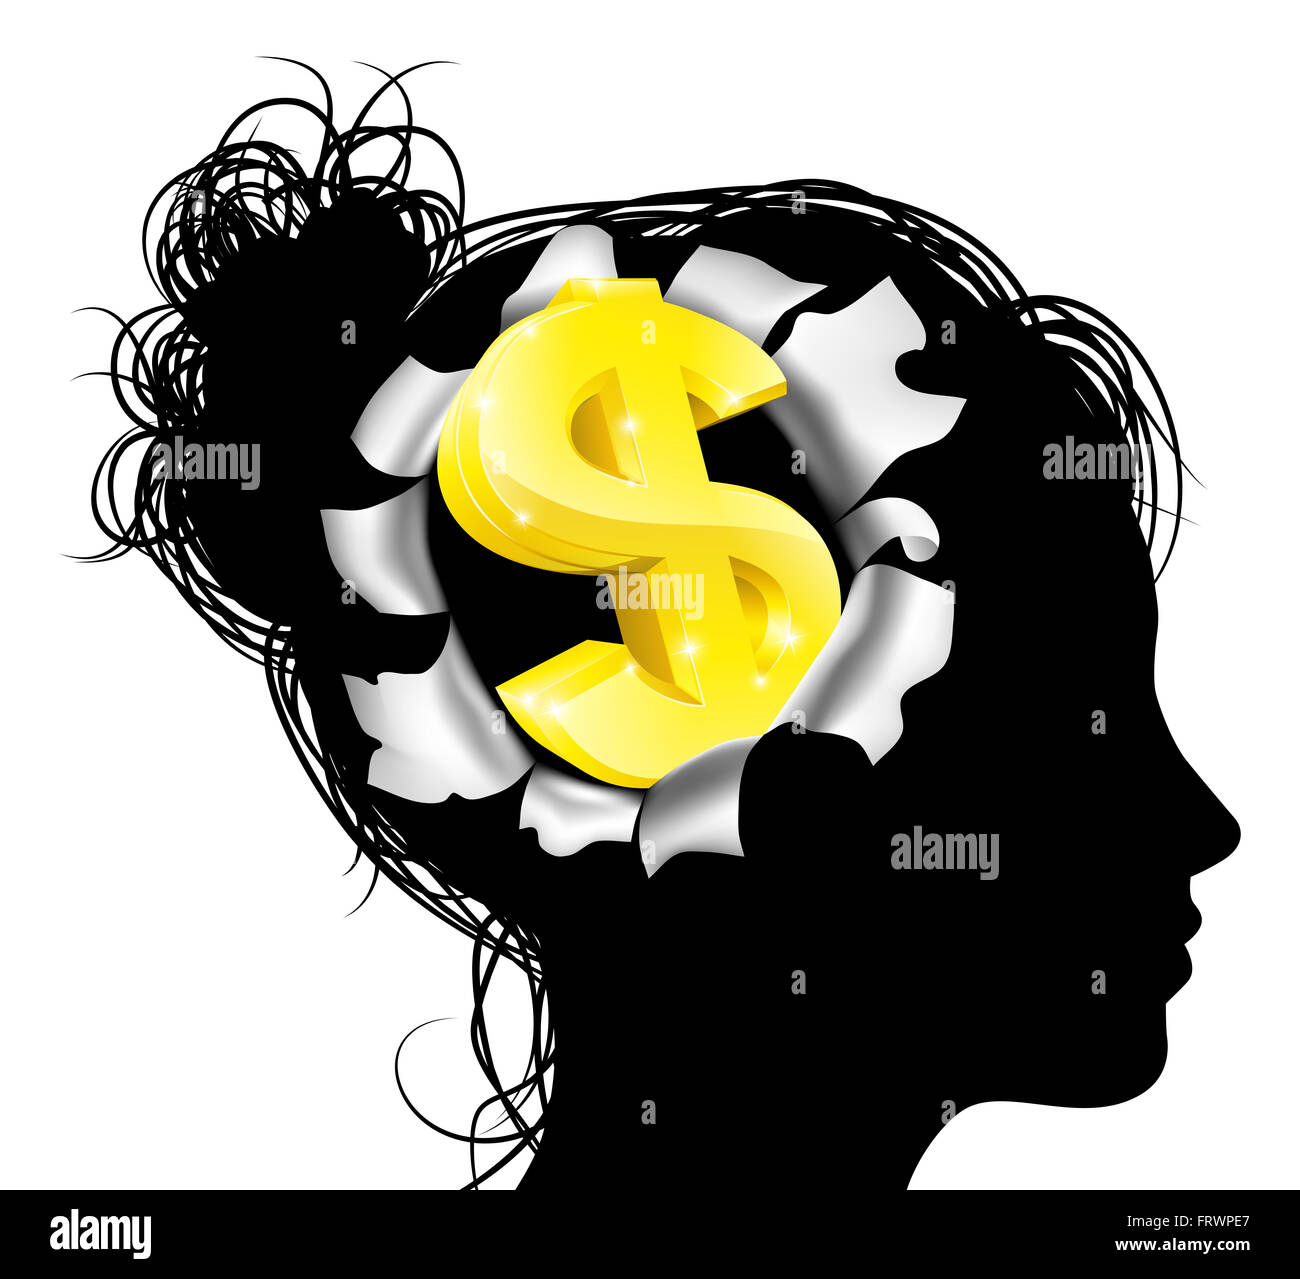 A womans head in silhouette with gold dollar sign symbol. Concept for thinking or dreaming about making money or business succes Stock Photo